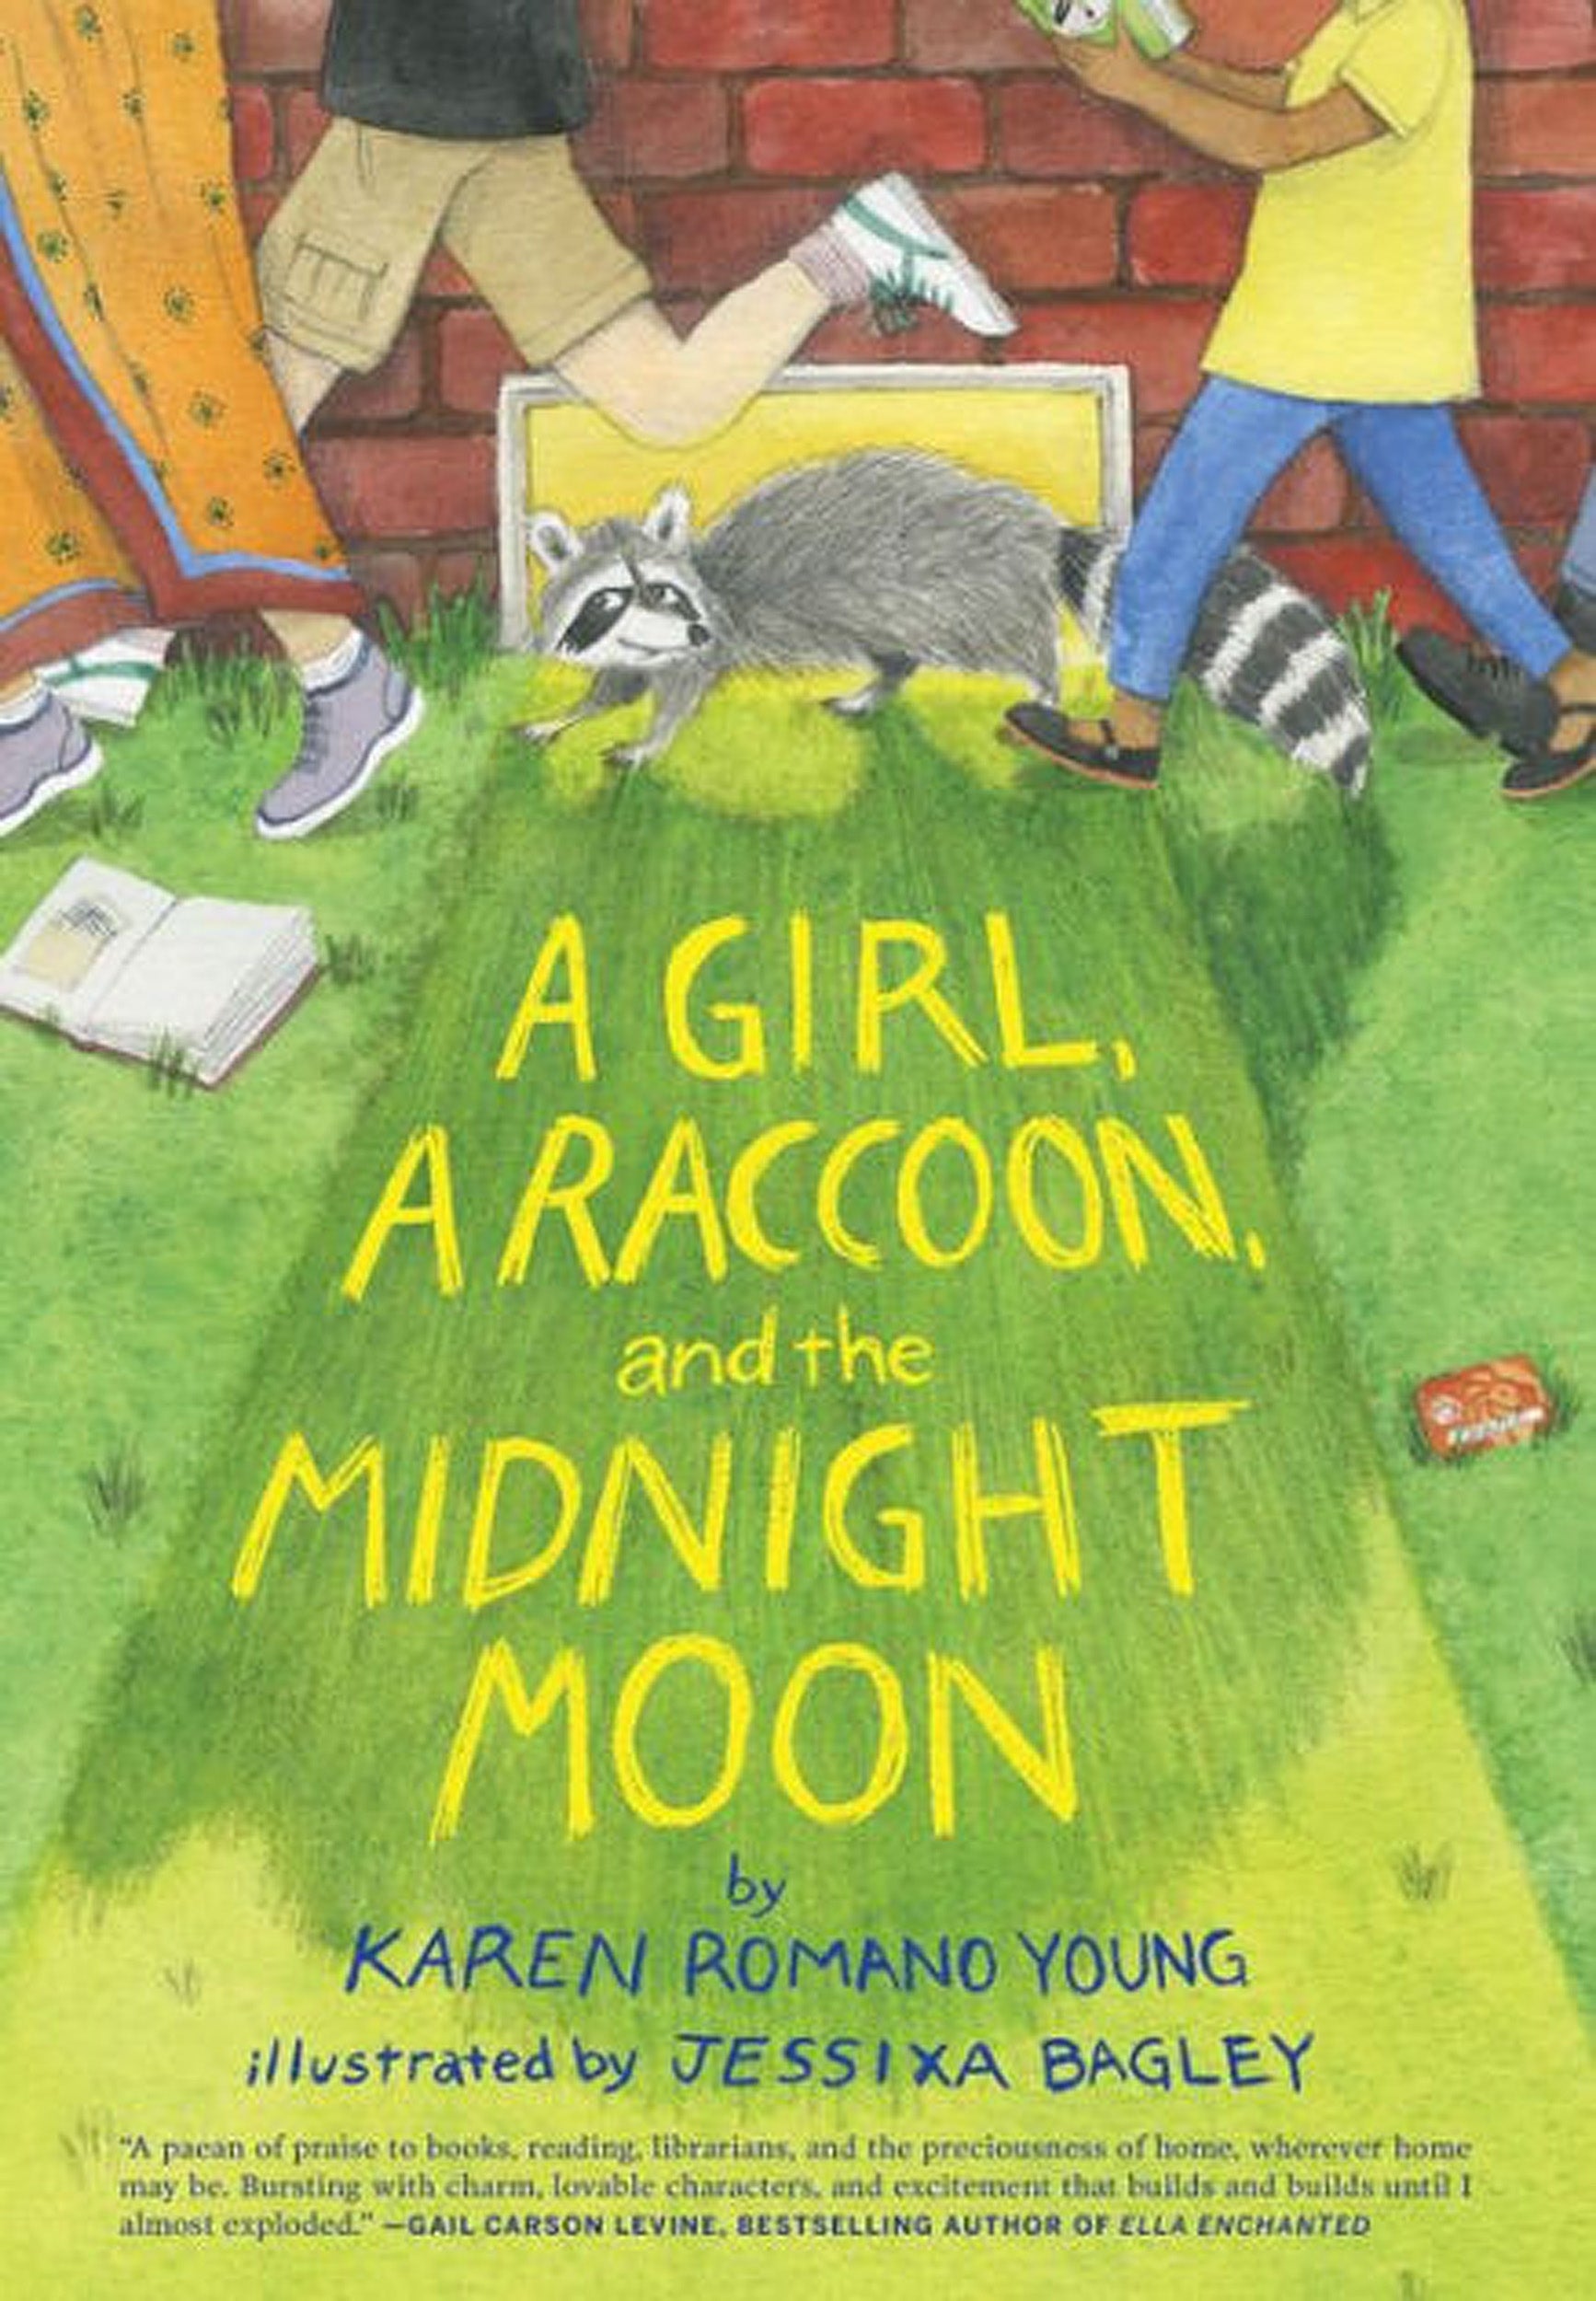 Cover: “A Girl, a Raccoon, and the Midnight Moon” by Karen Romano Young.